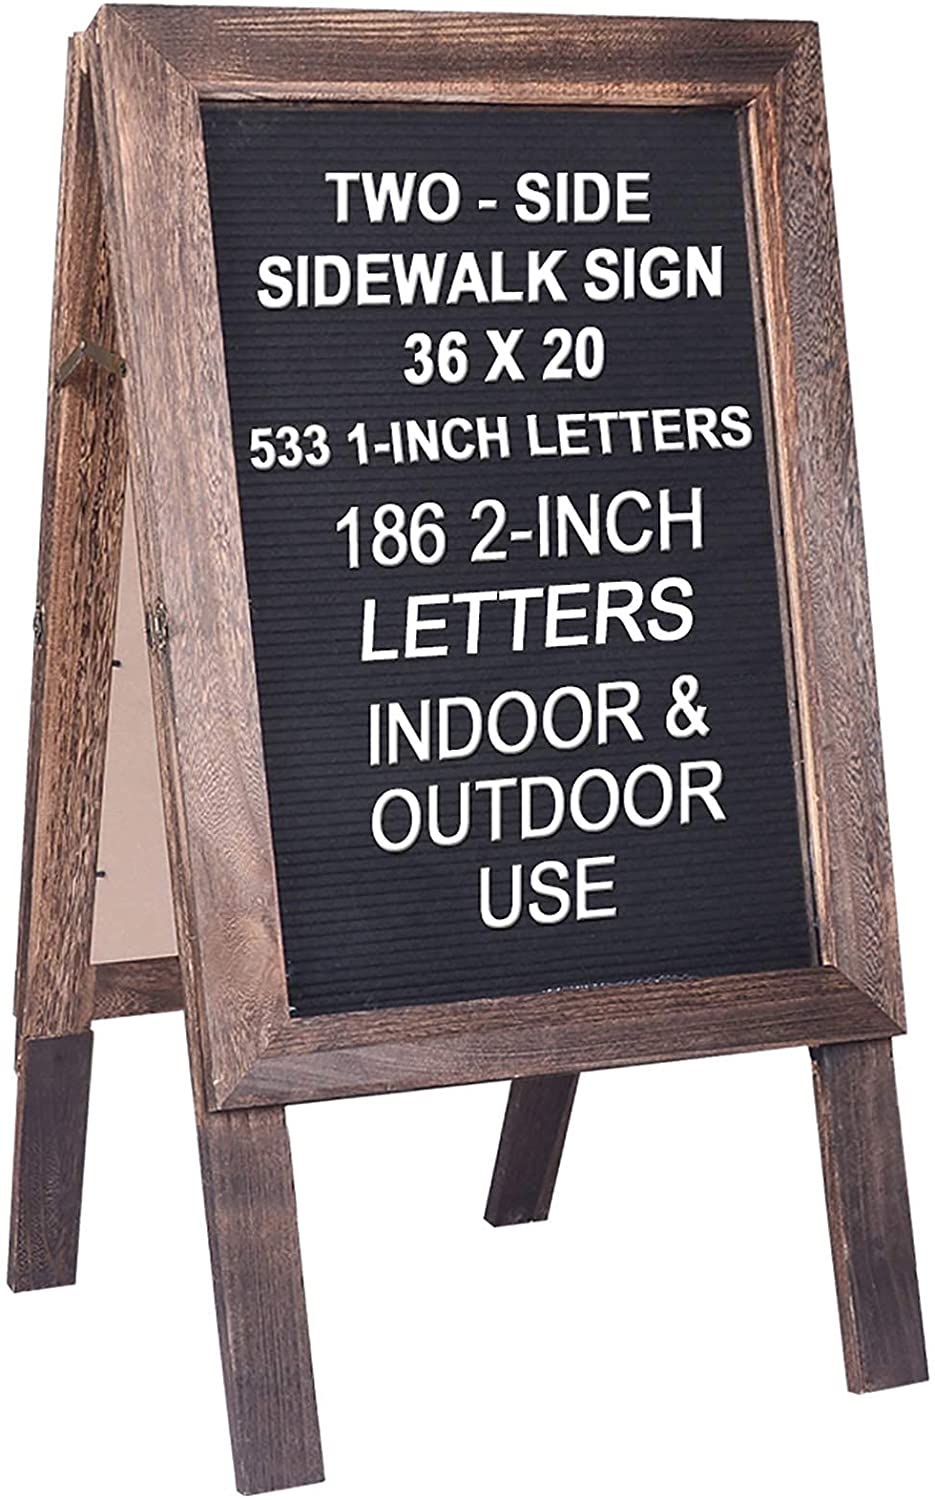 Large Wooden A-Frame Sidewalk Sign Board 36"x20" Double Sided Felt Letter Board Sandwich Board Sturdy Display Standing Sidewalk Sign with Changeable Letters, Rustic Message Board for Restaurant.